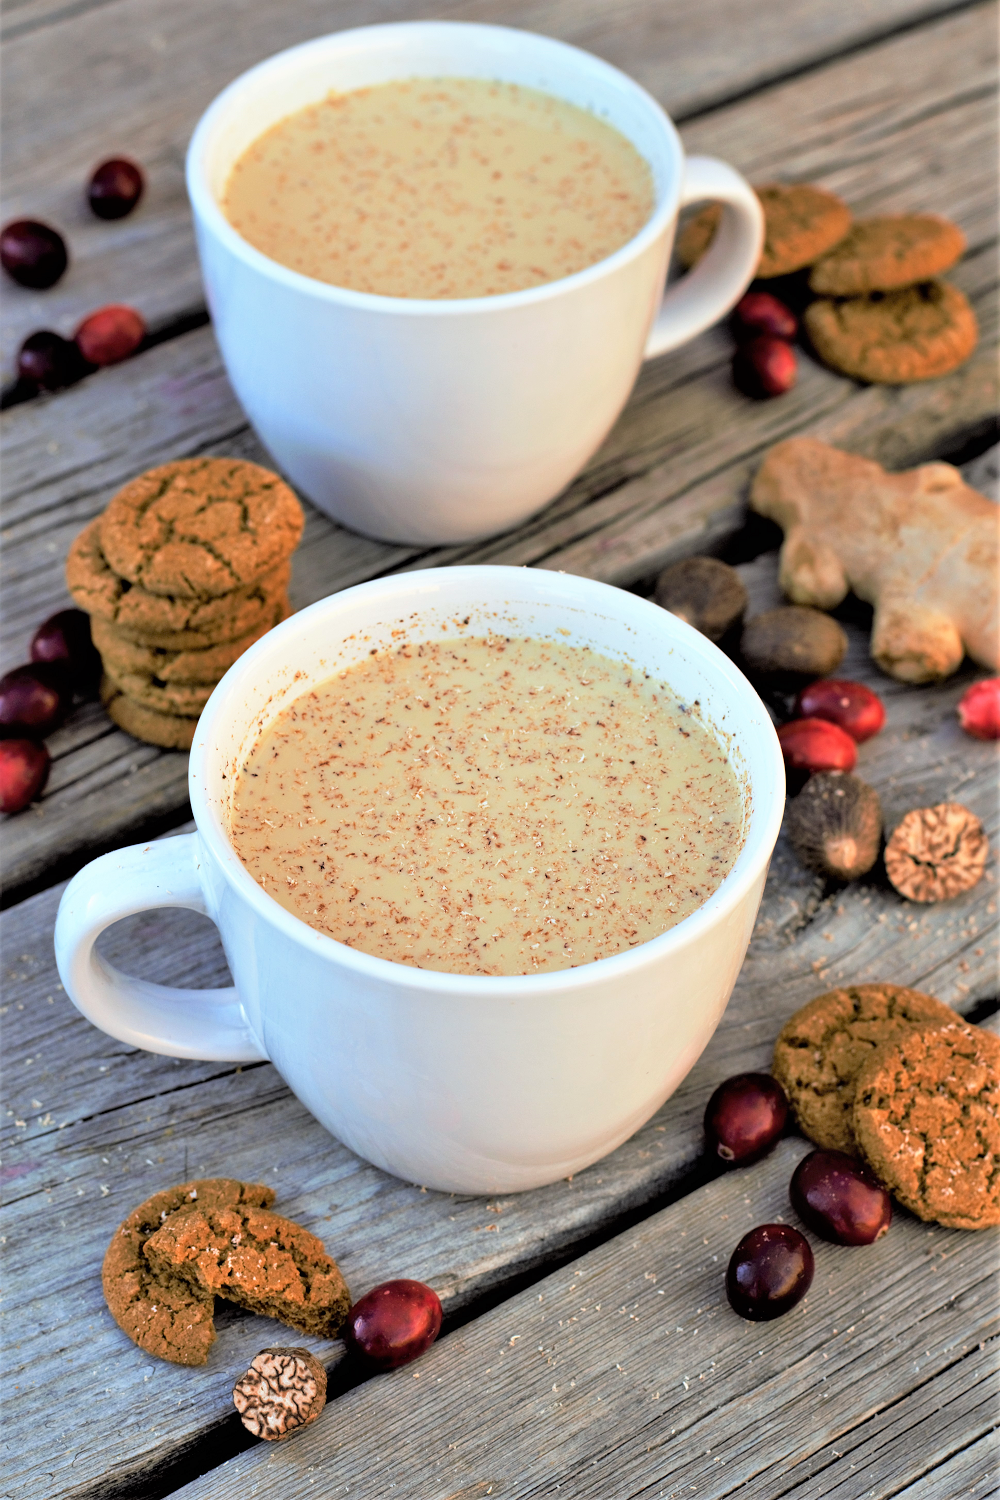 Whisk up a big pot of spicy-sweet warm comfort with molasses, fresh ginger, & nutmeg for everyone to sip while you decorate your house, gingerbread or real!